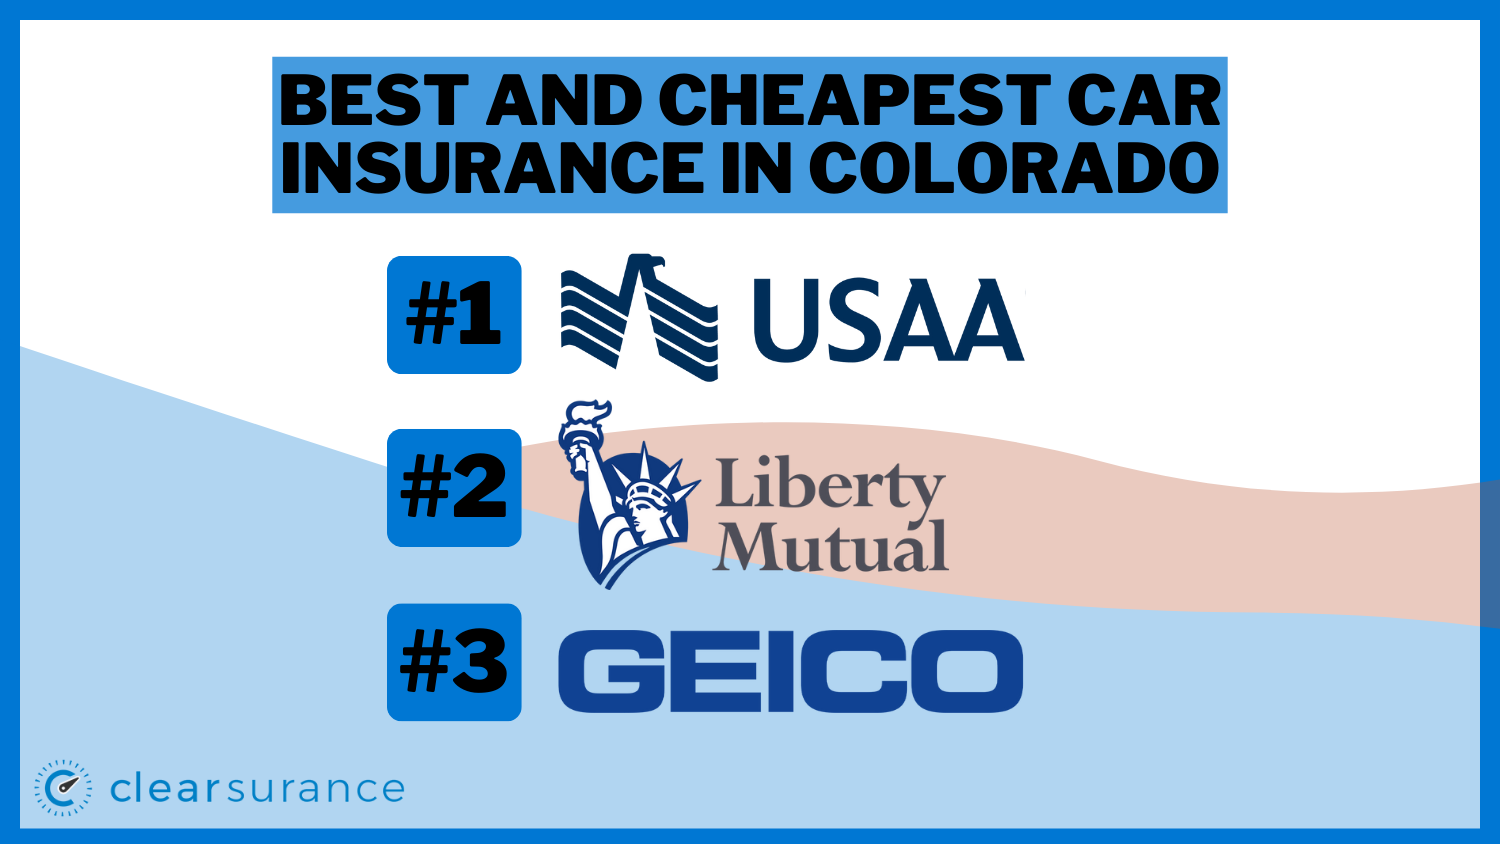 Best and Cheapest Car Insurance in Colorado: USAA, Liberty Mutual, Geico